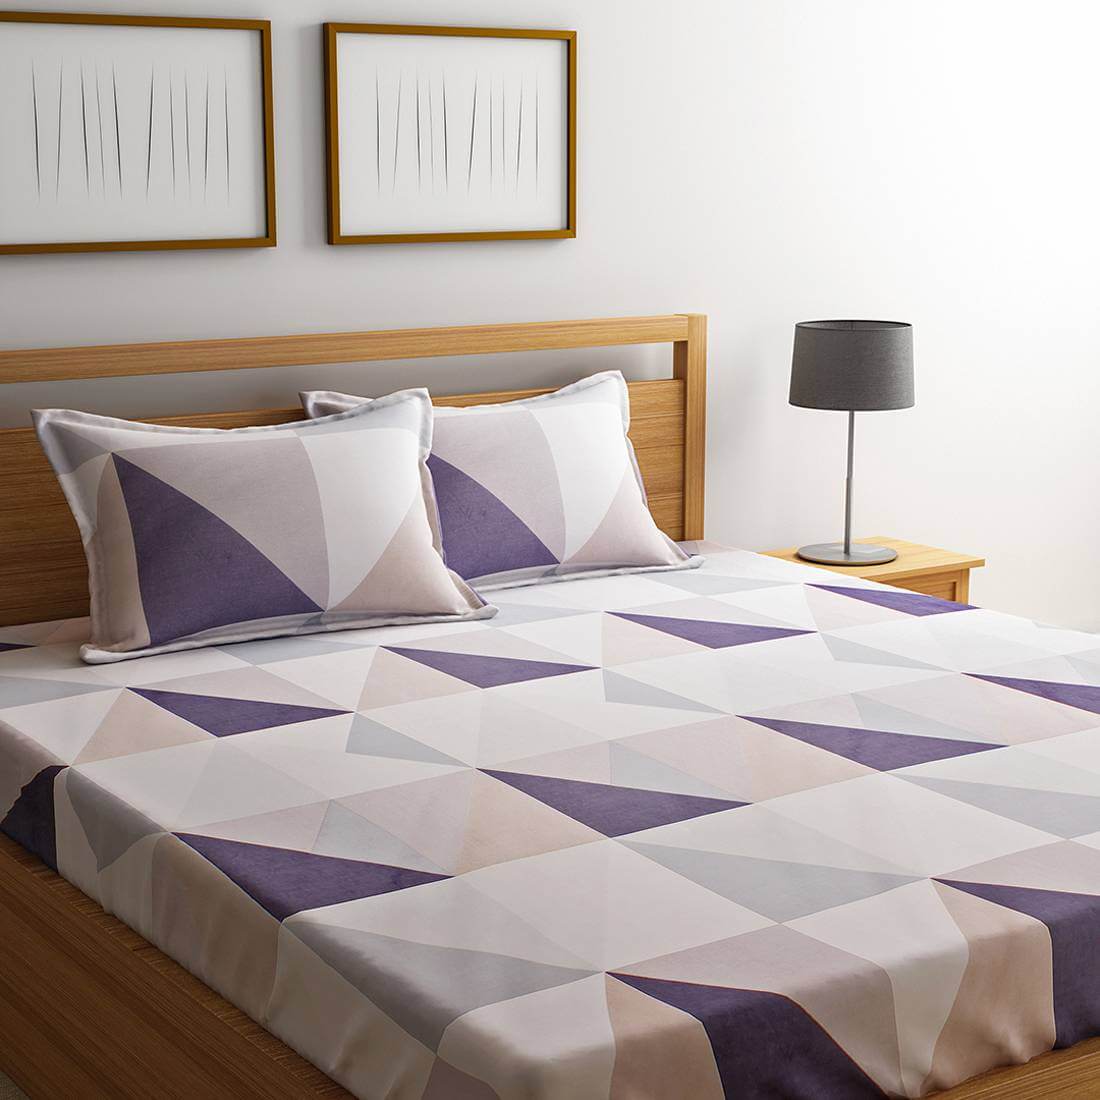 Sheet in a light color with simple patterns